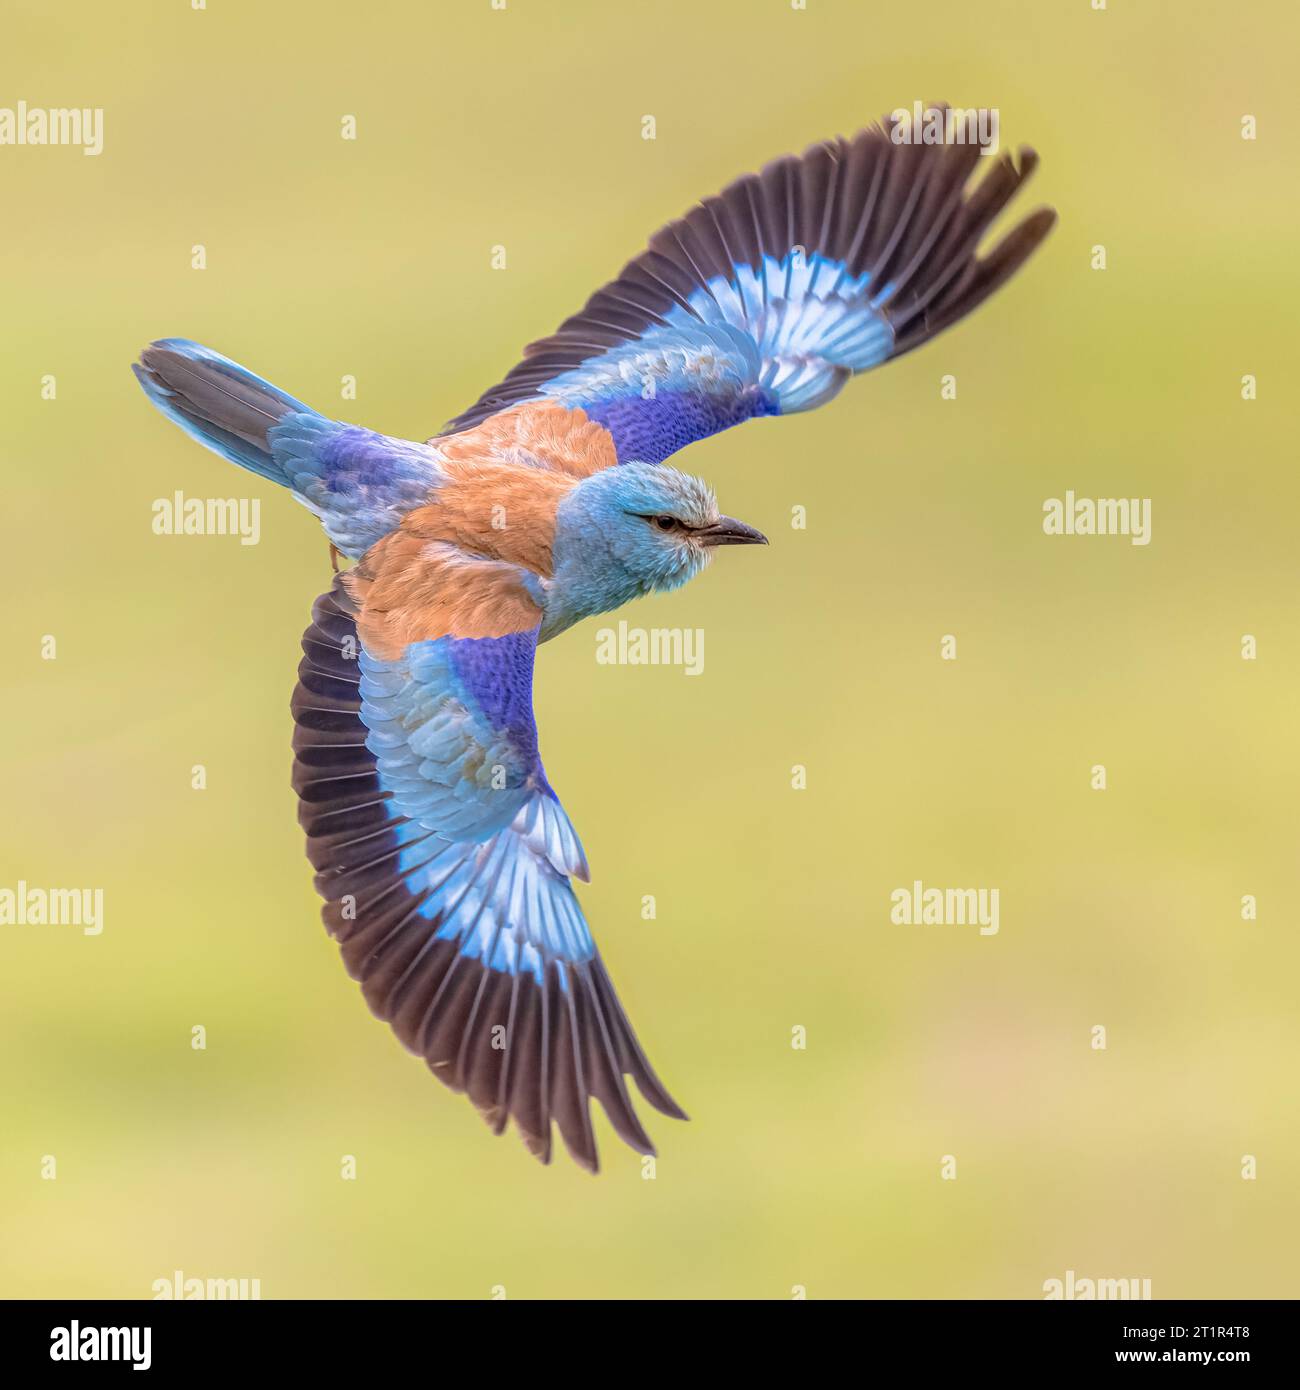 European roller (Coracias garrulus) flying against bright background. This Migratory Bird Breeds in Southern Europe. Hungary. Wildlife Scene of Nature Stock Photo